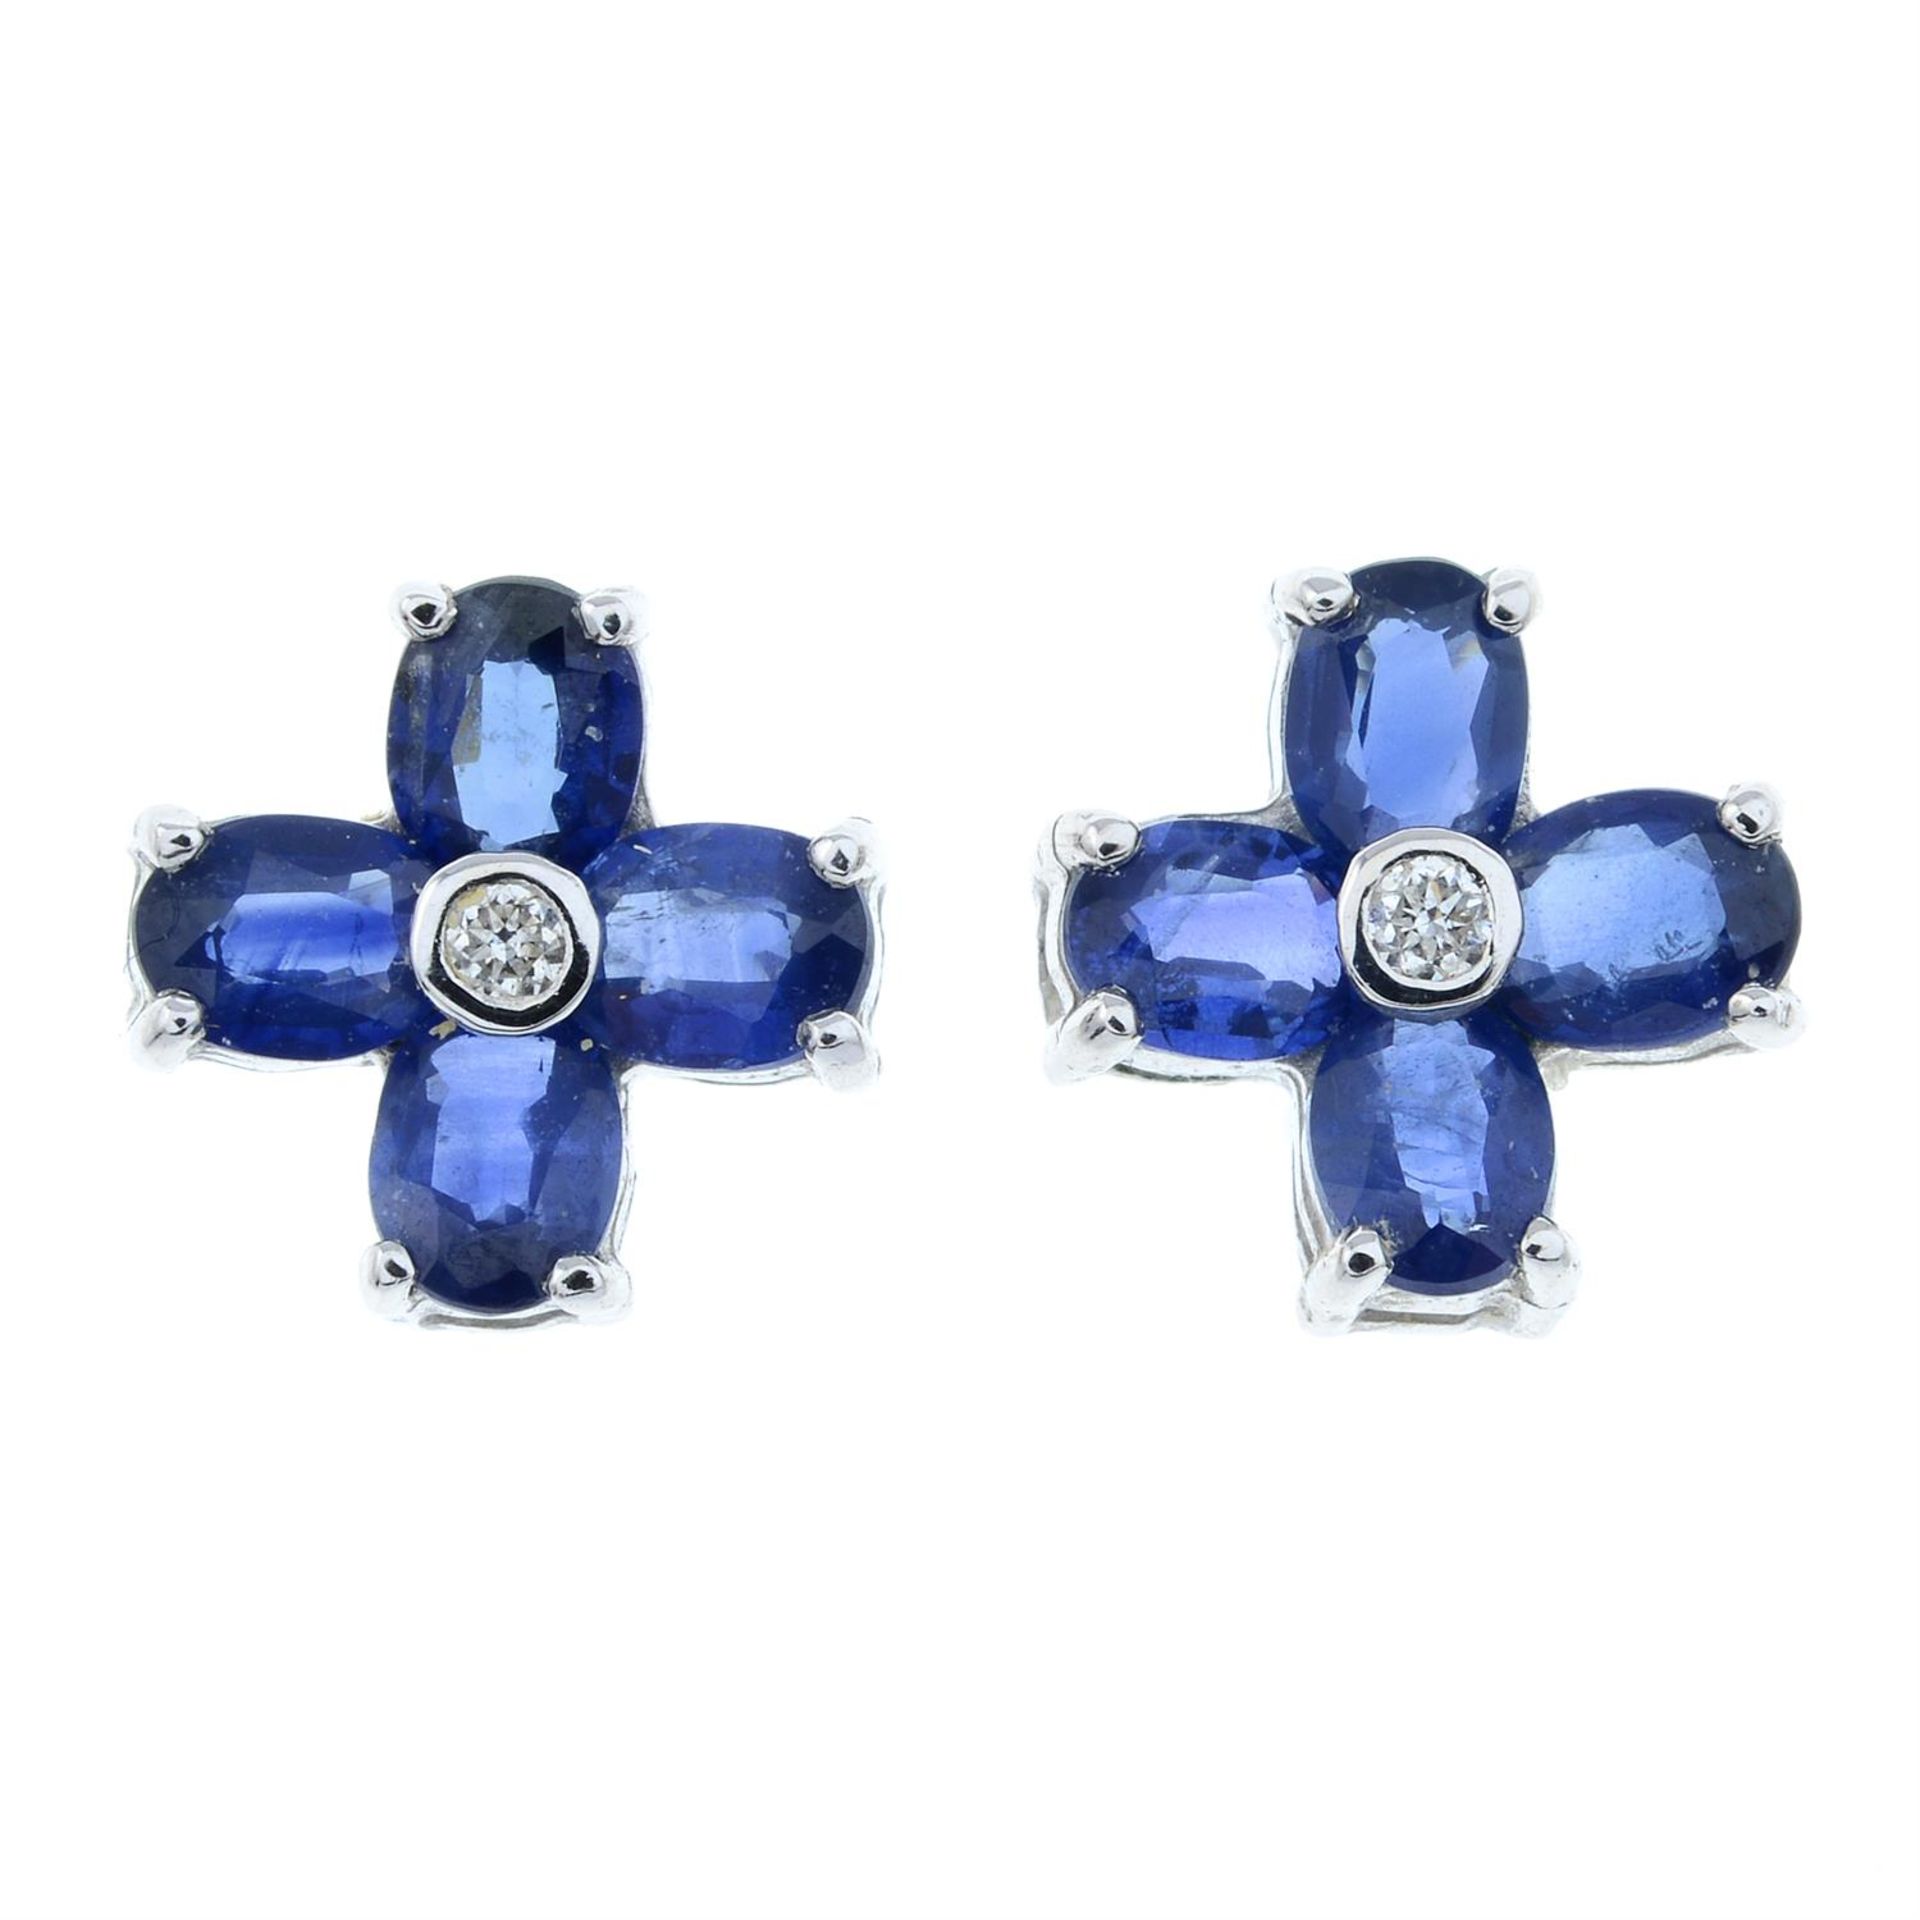 A pair of brilliant-cut diamond and sapphire floral design stud earrings.